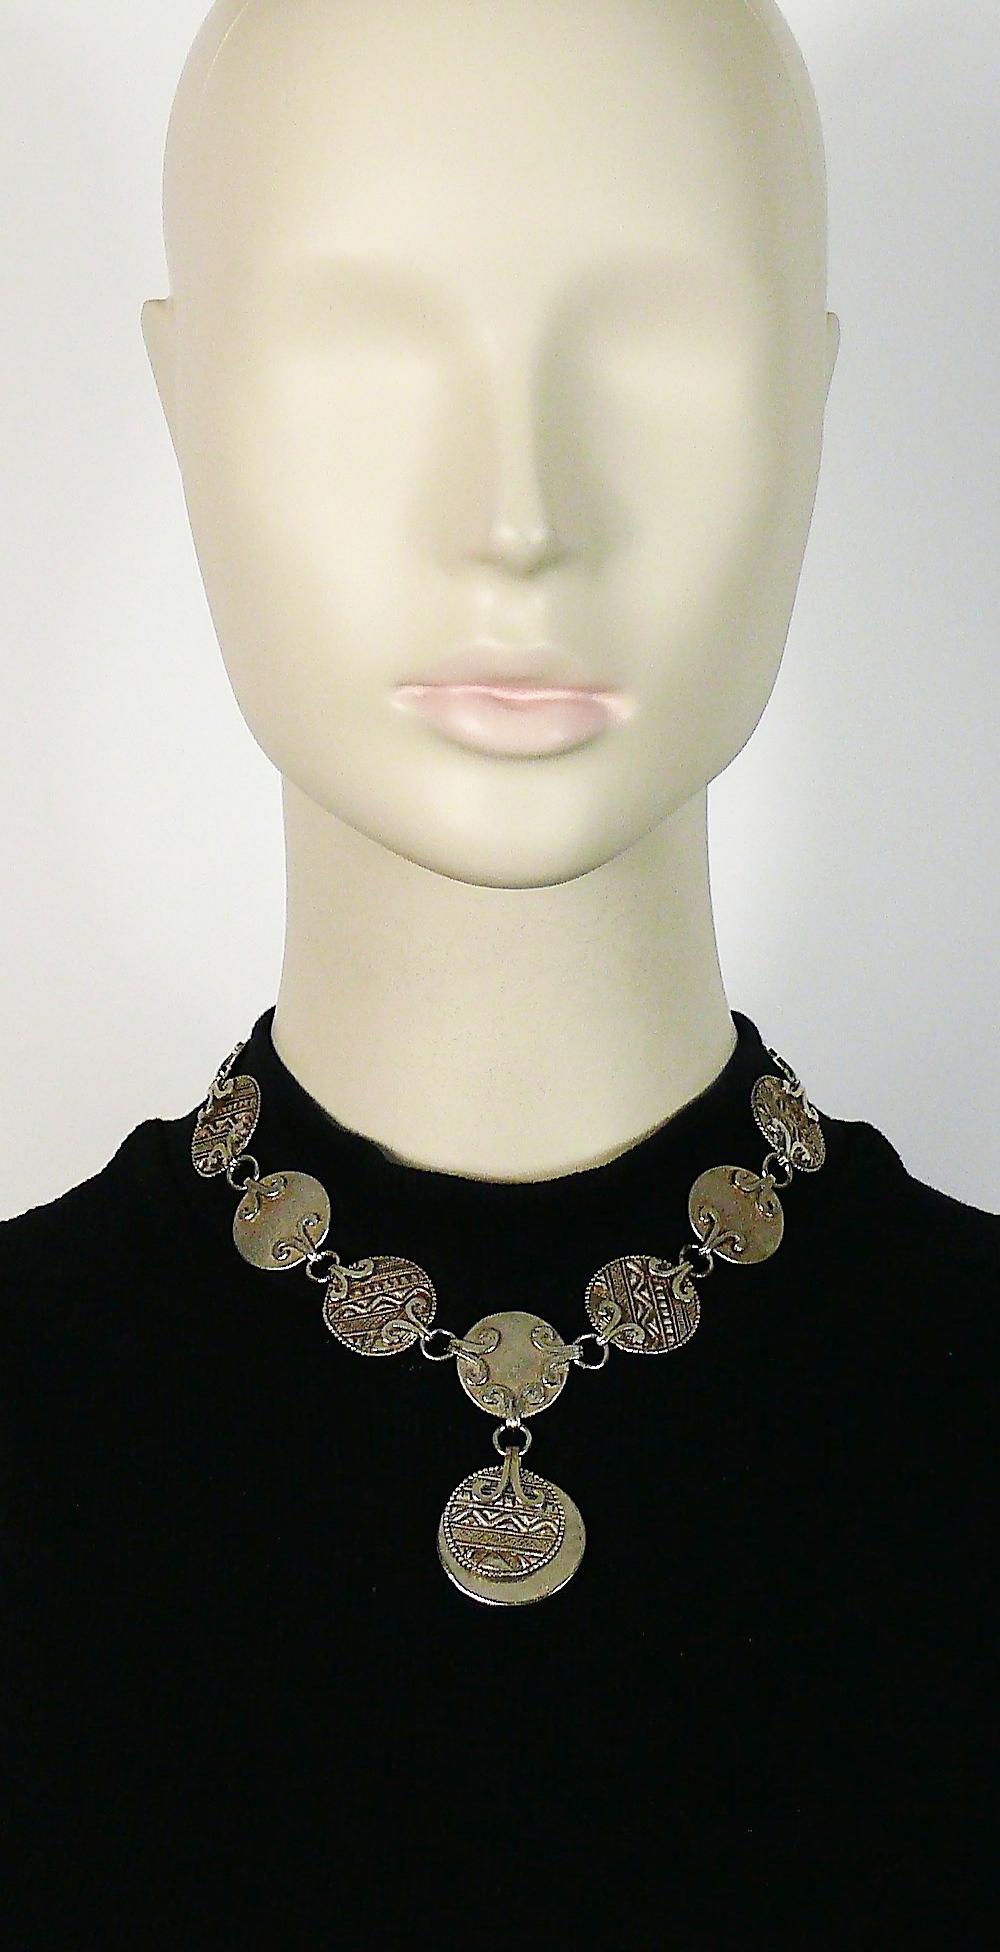 YVES SAINT LAURENT vintage antiqued silver tone disc links necklace featuring tuareg pattern inspired engravings.

Adjustable T-bar and toggle closure.

Embossed YSL Made in France.

Indicative measurements : adjustable length from approx 37 cm